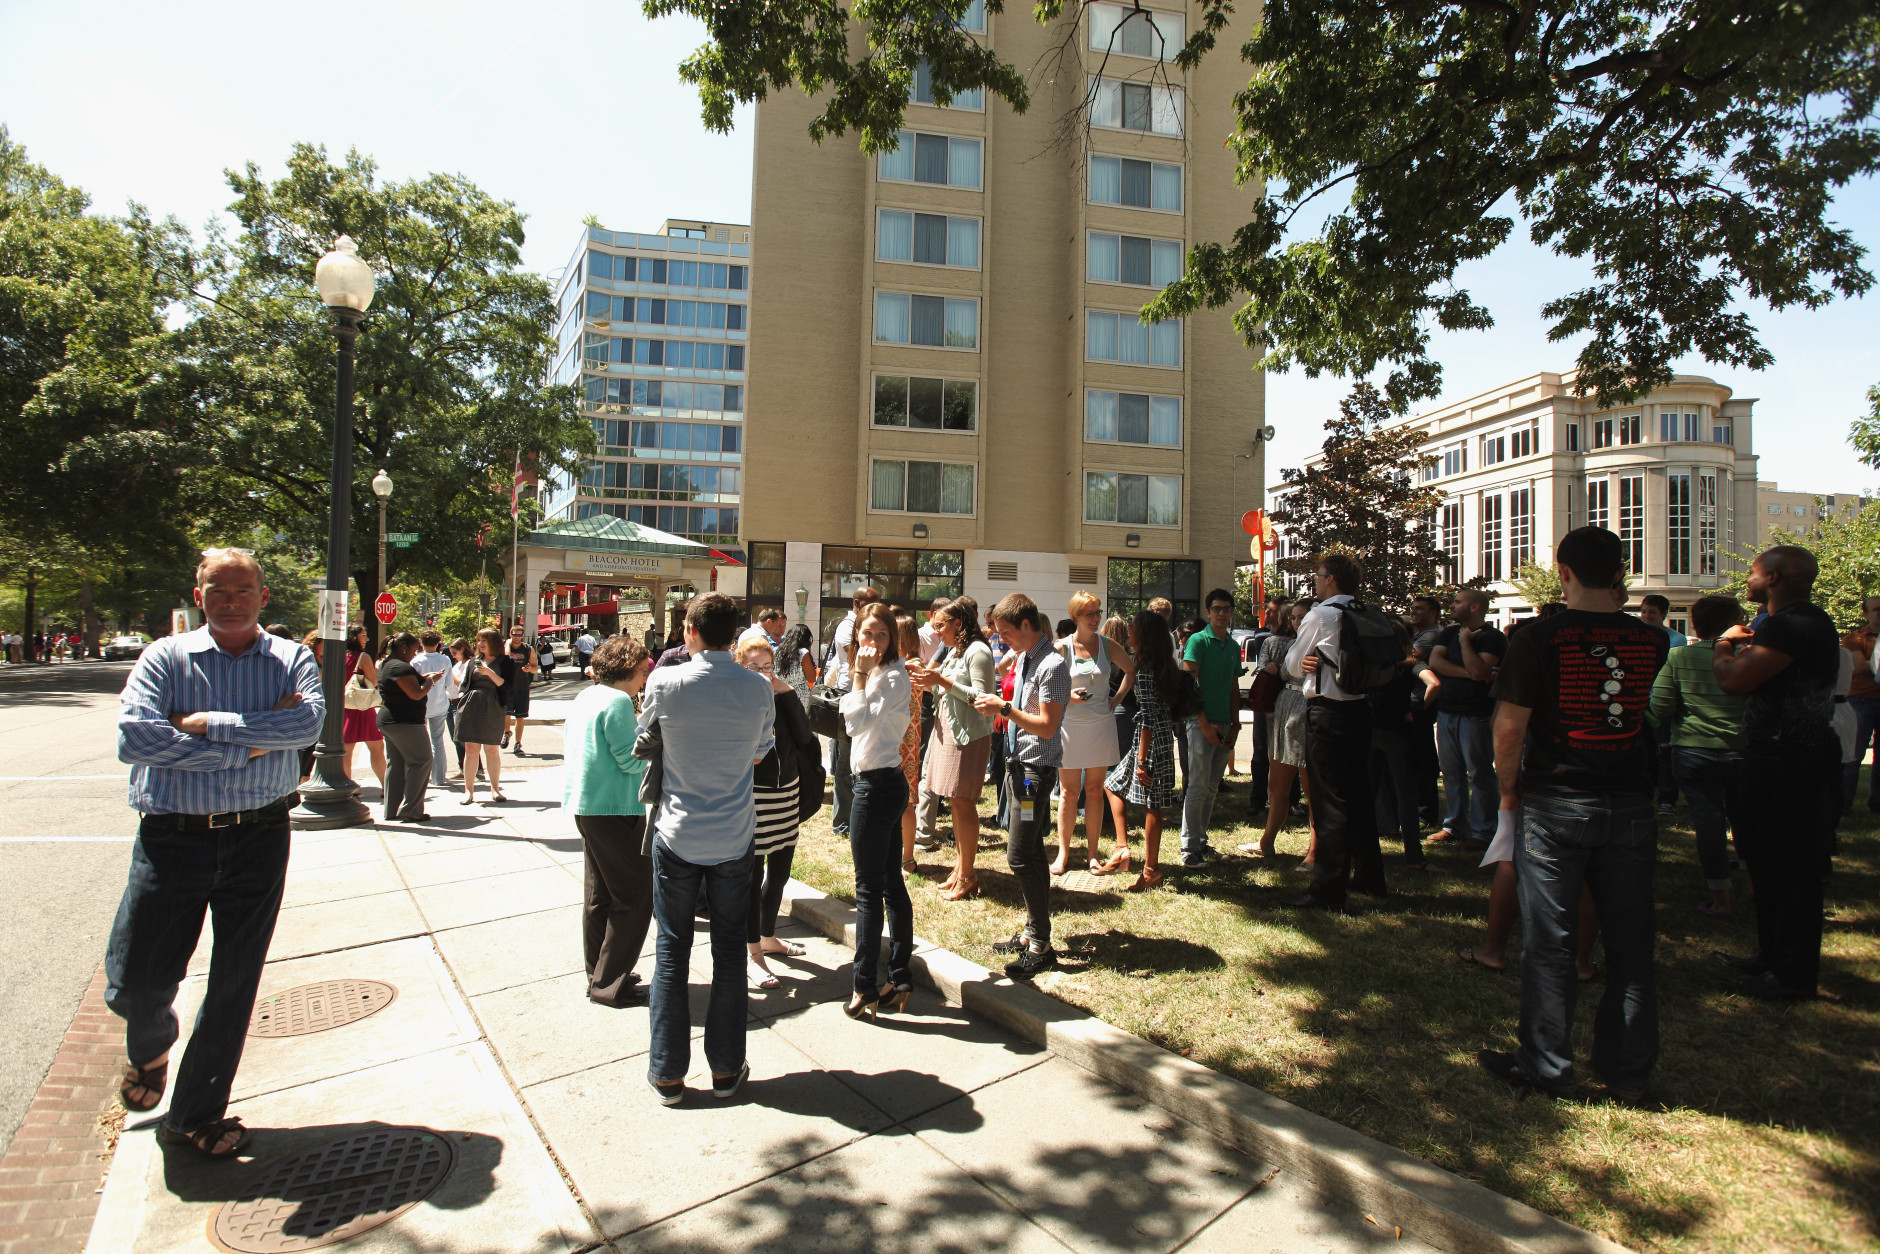 WASHINGTON, DC - AUGUST 23:  People try to communicate on their cell phones after being evacuated from their building after a 5.8 magnitude earthquake struck the east coast August 23, 2011 in Washington, DC.  (Photo by Chip Somodevilla/Getty Images)